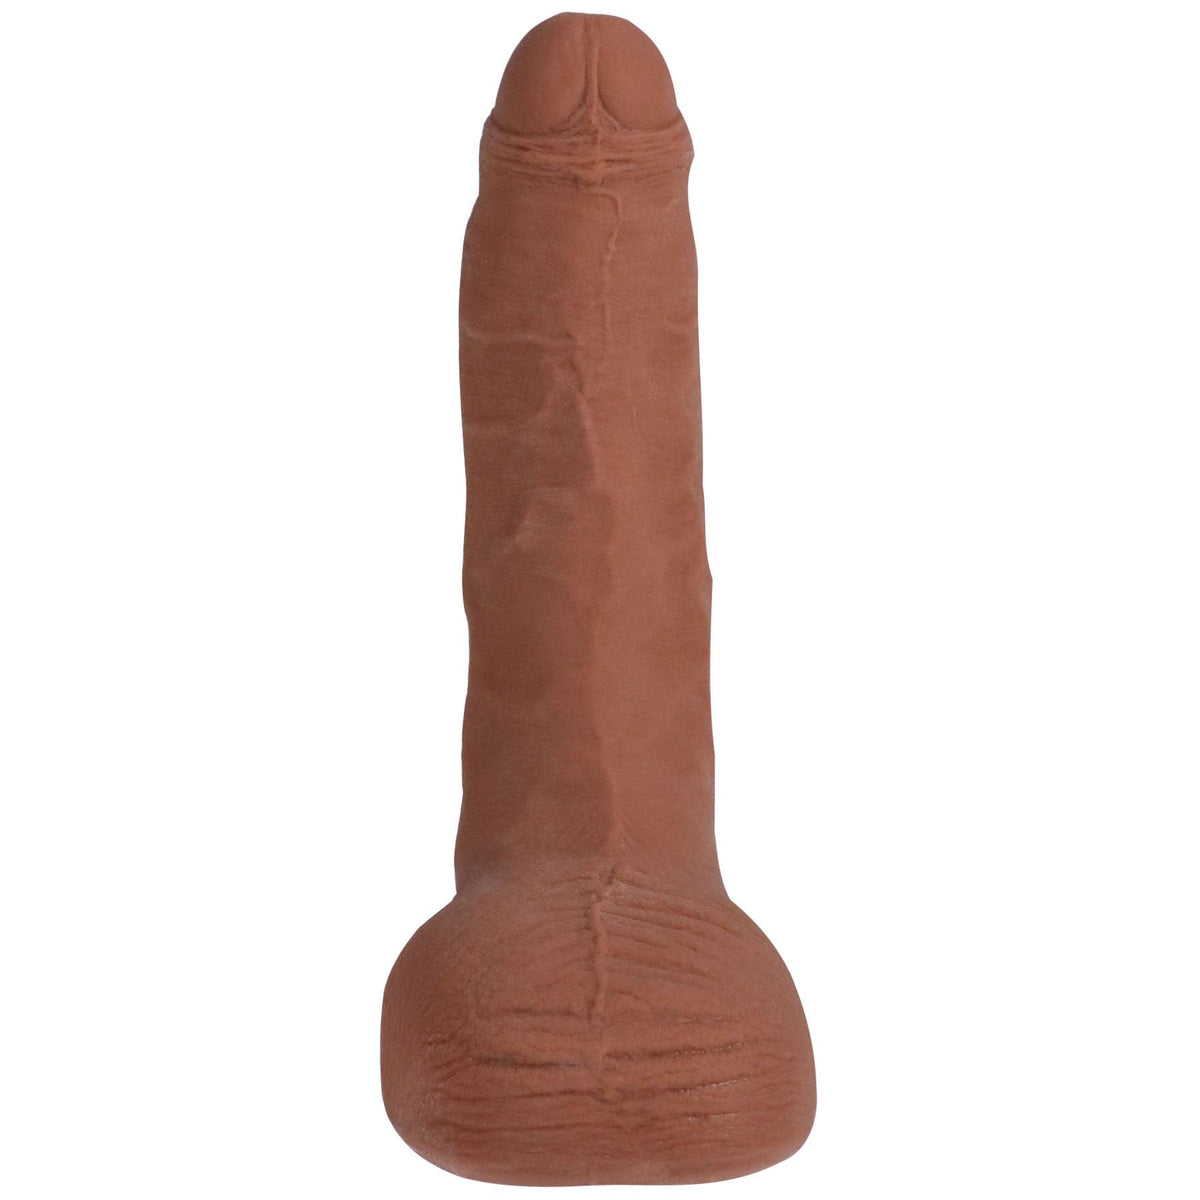 signature cocks leo vice 7 5 inch cock with removable vac u lock suction cup caramel